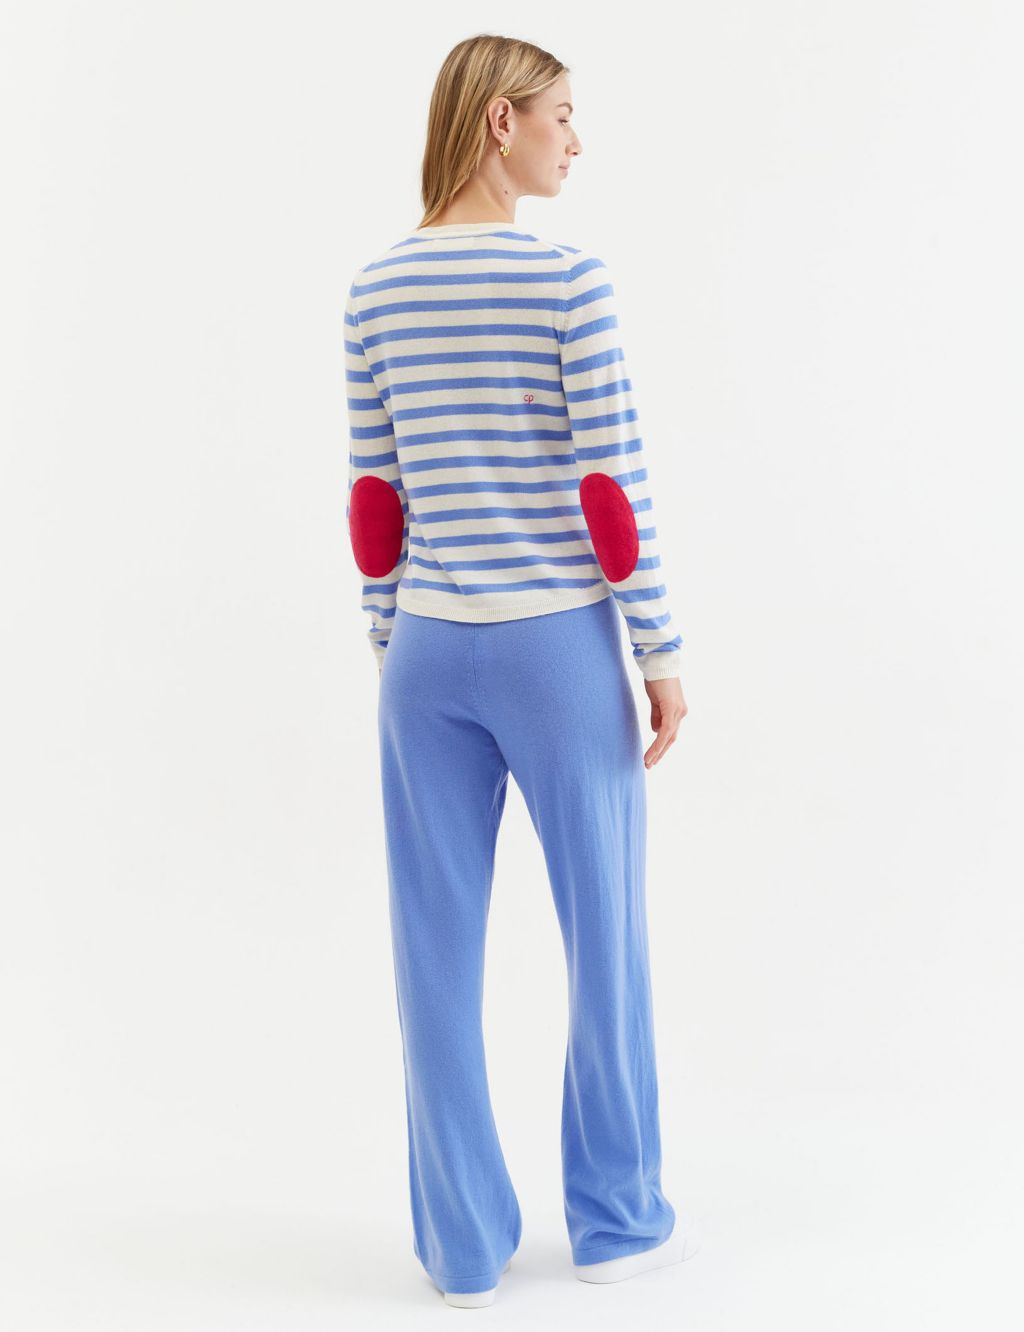 Wool Rich Striped Sweatshirt with Cashmere 4 of 5